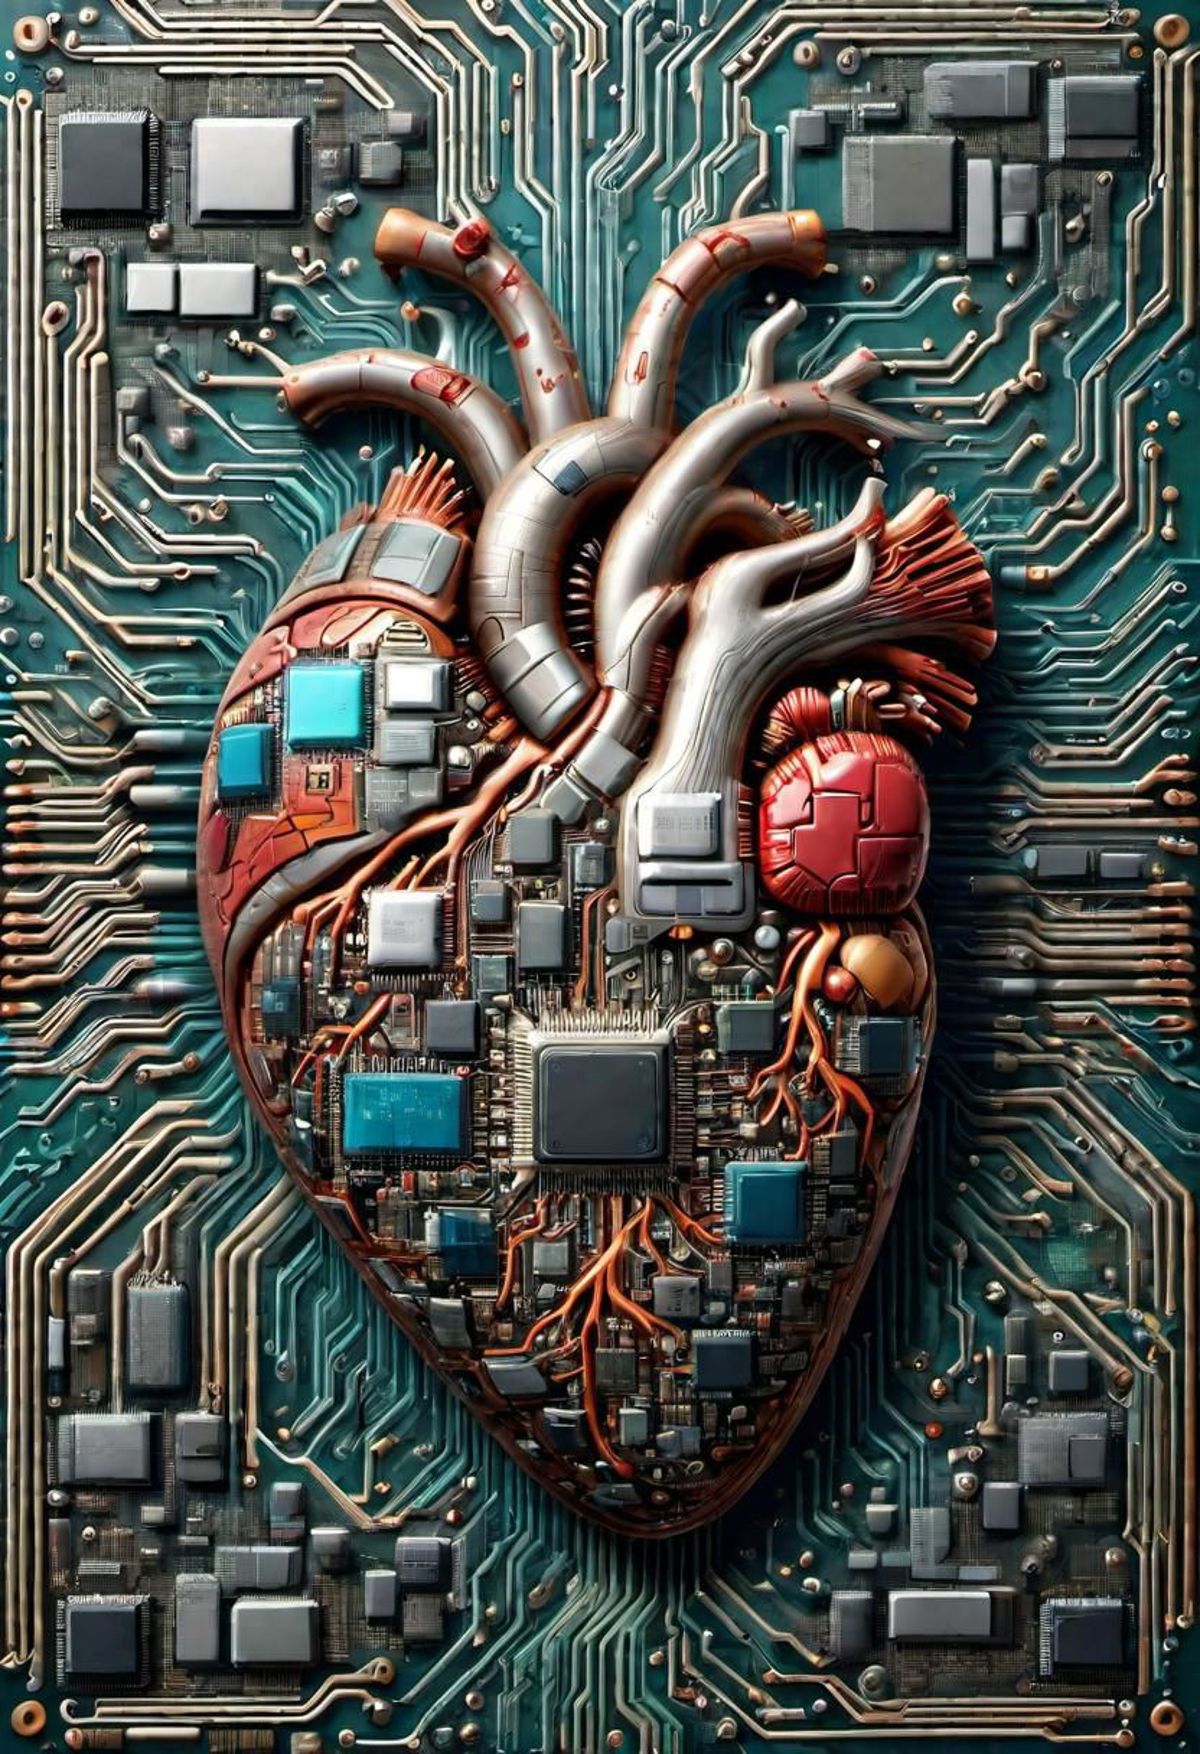 A heart made out of computer parts and wires.